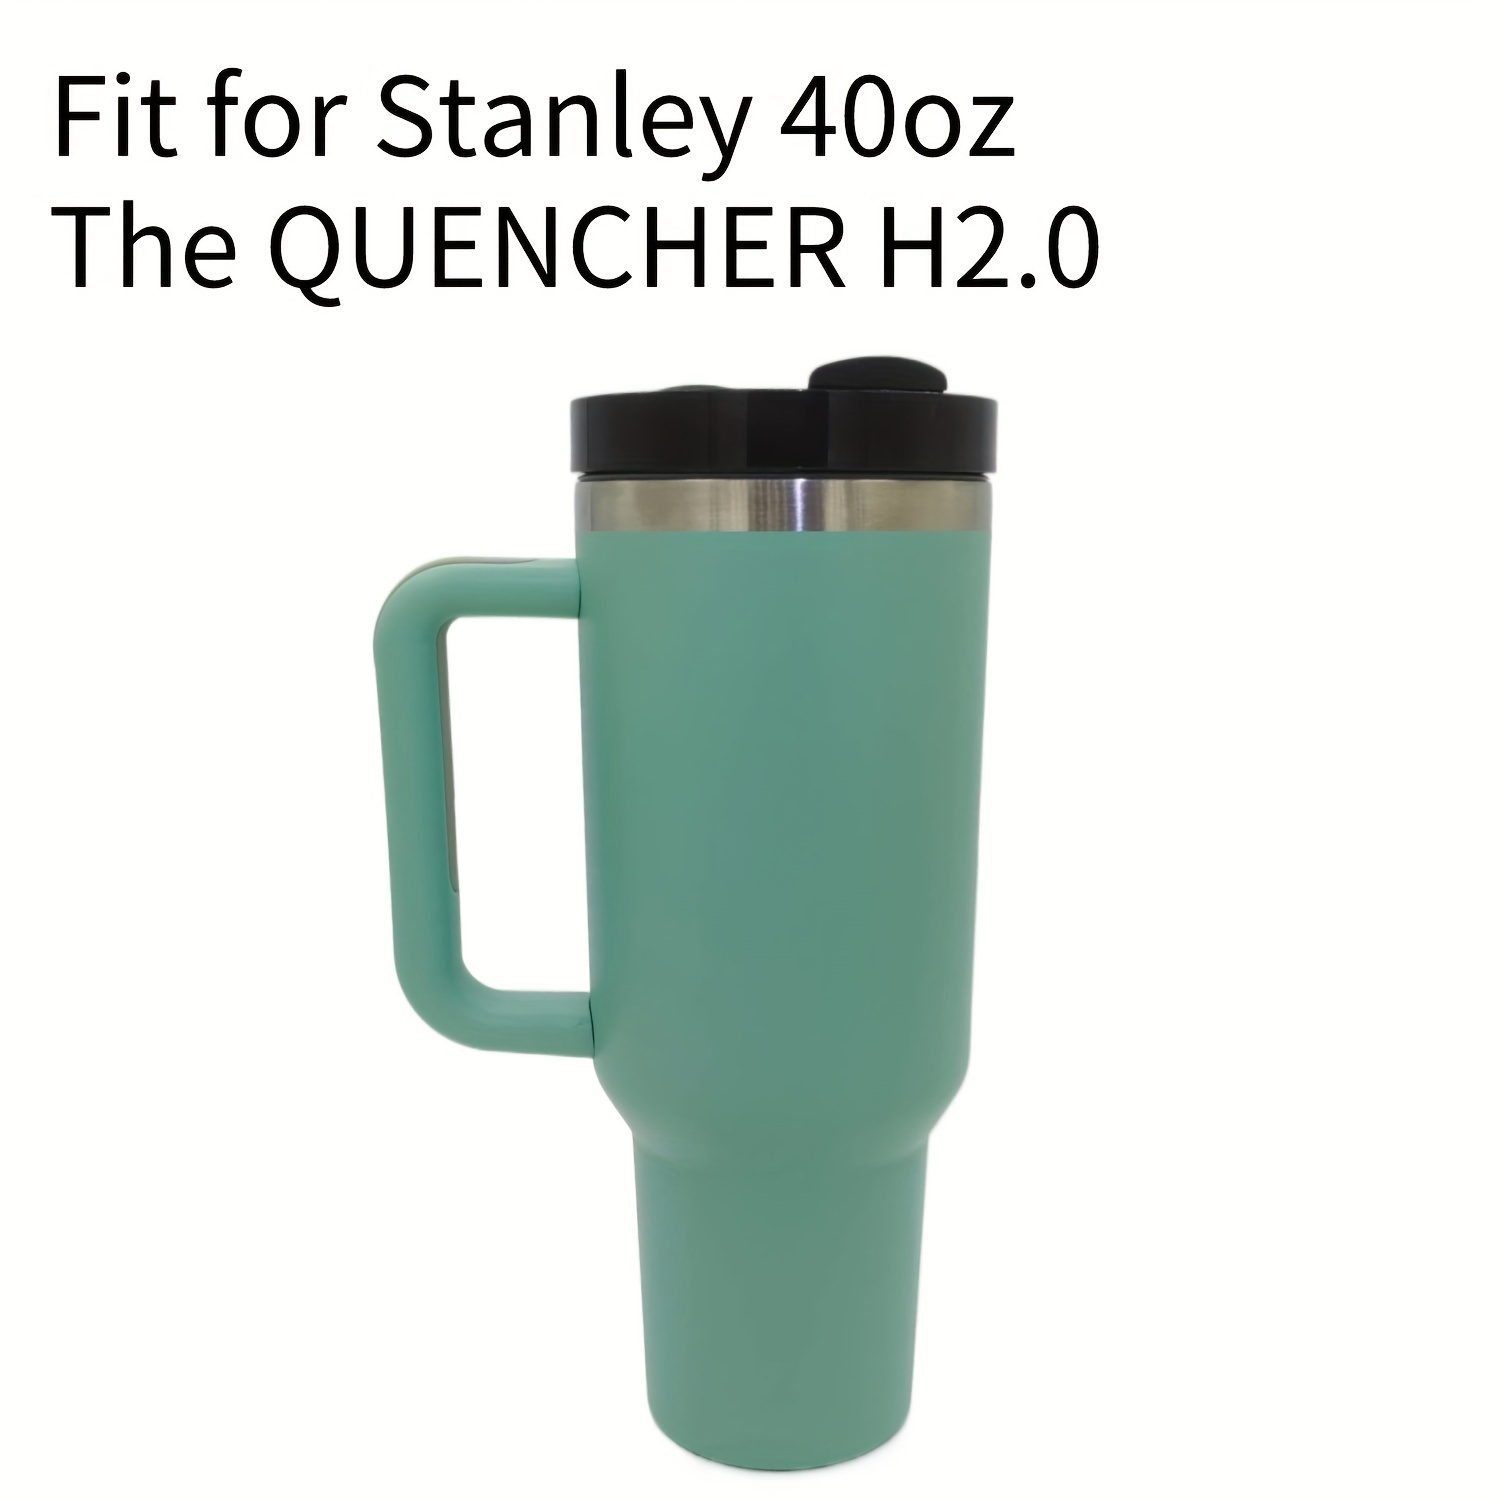 Is the Stanley 40oz tumbler too big?